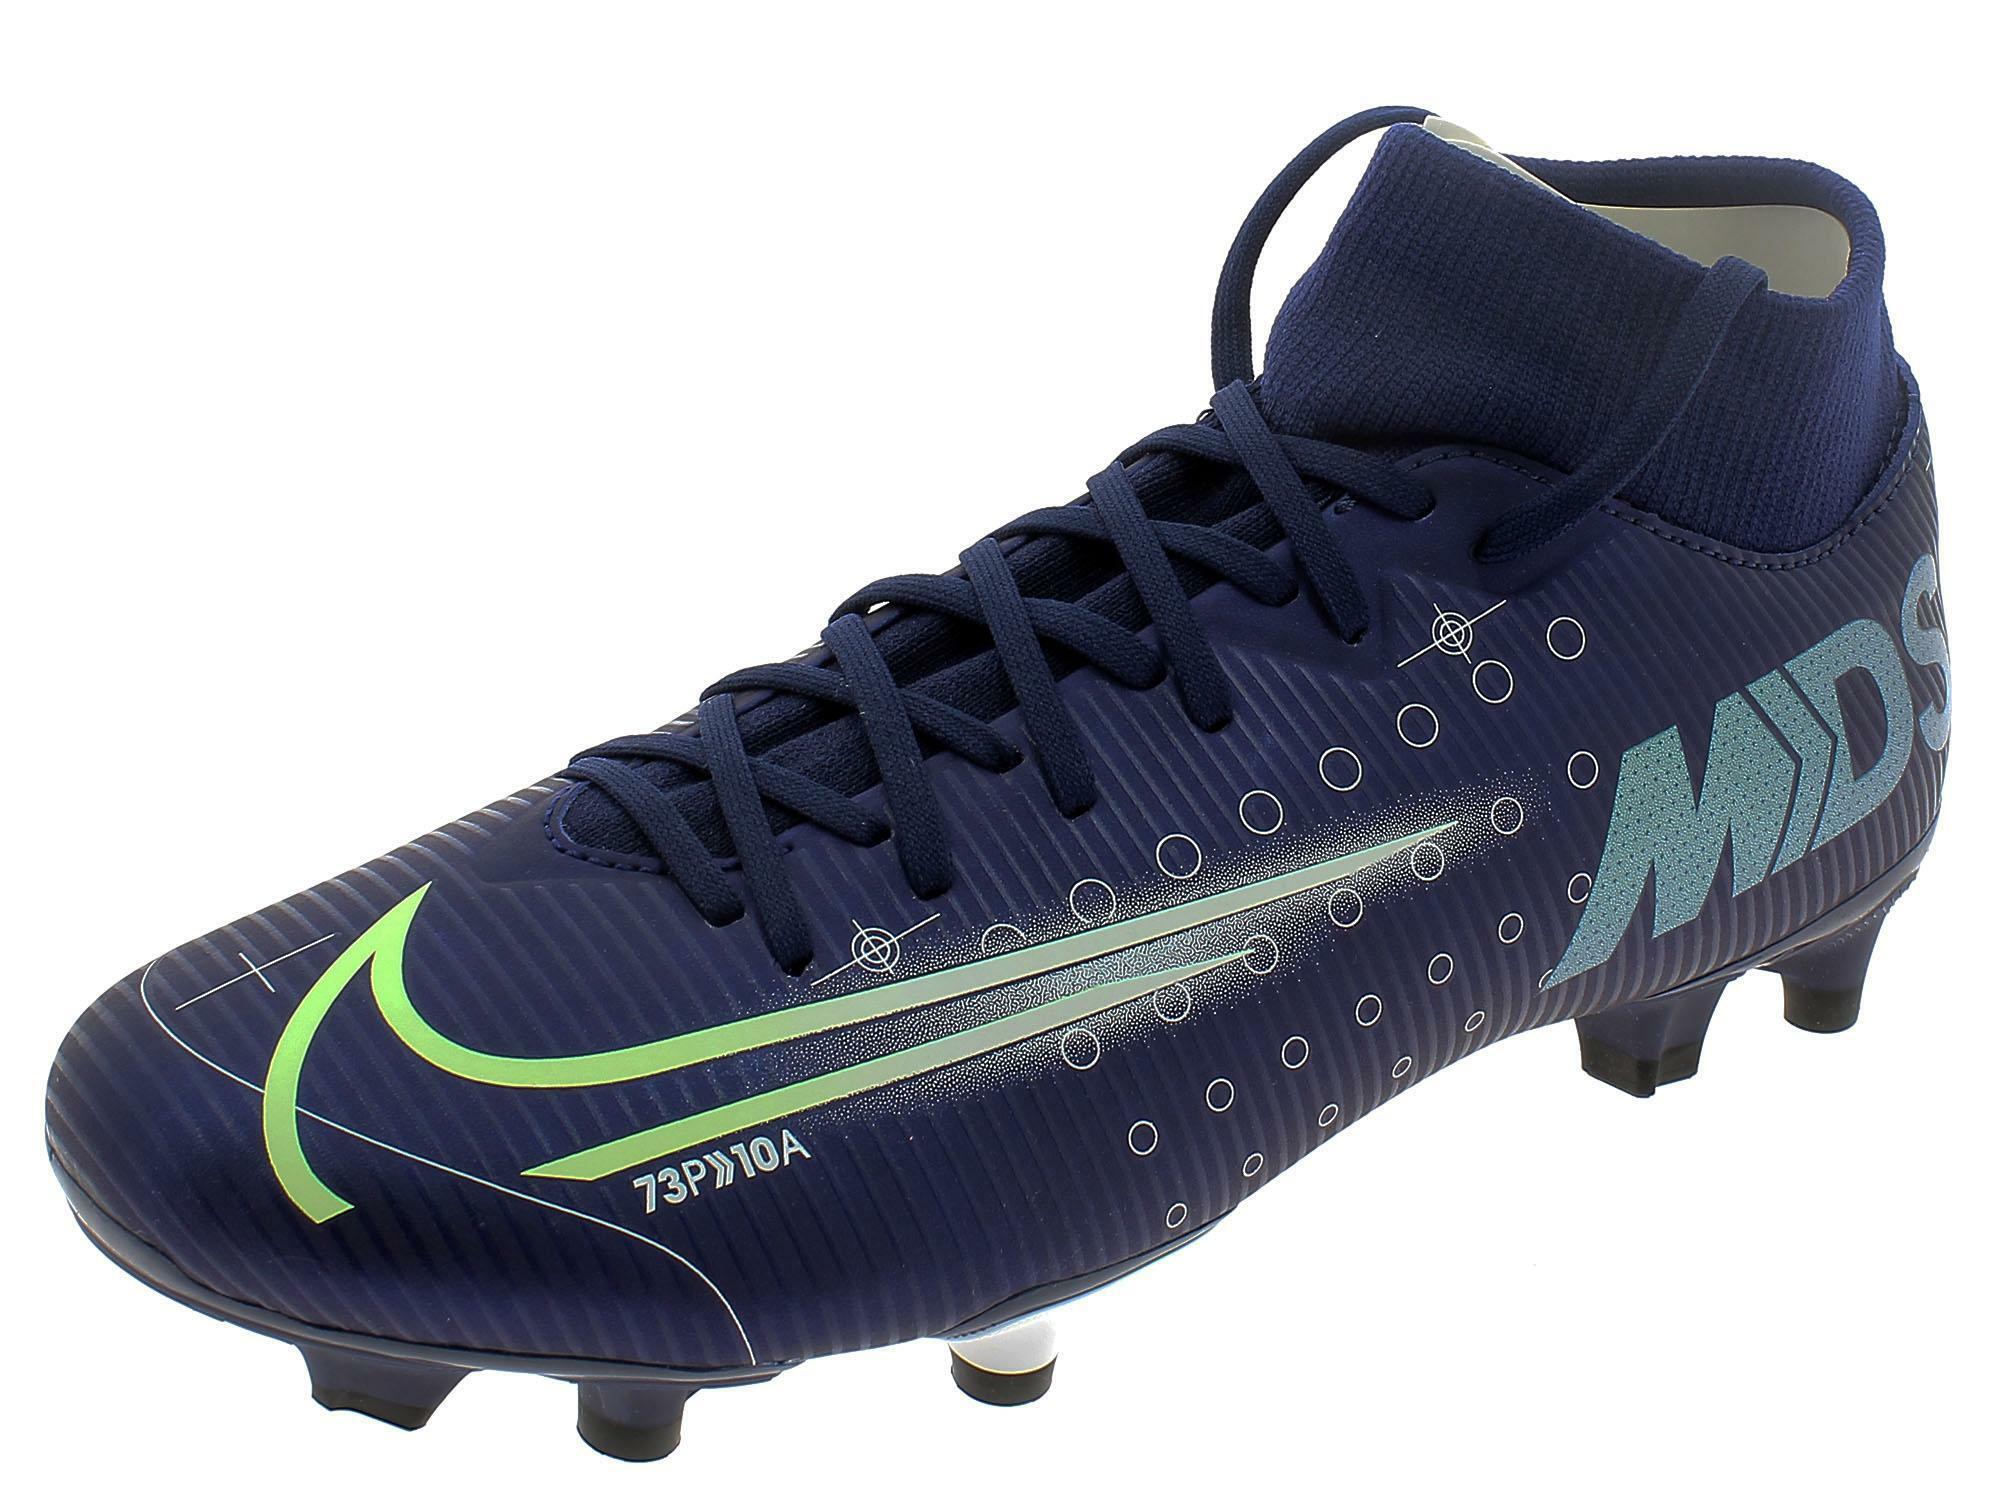 Nike Mercurial Superfly 7 Academy MDS TF Soccer Shoe.